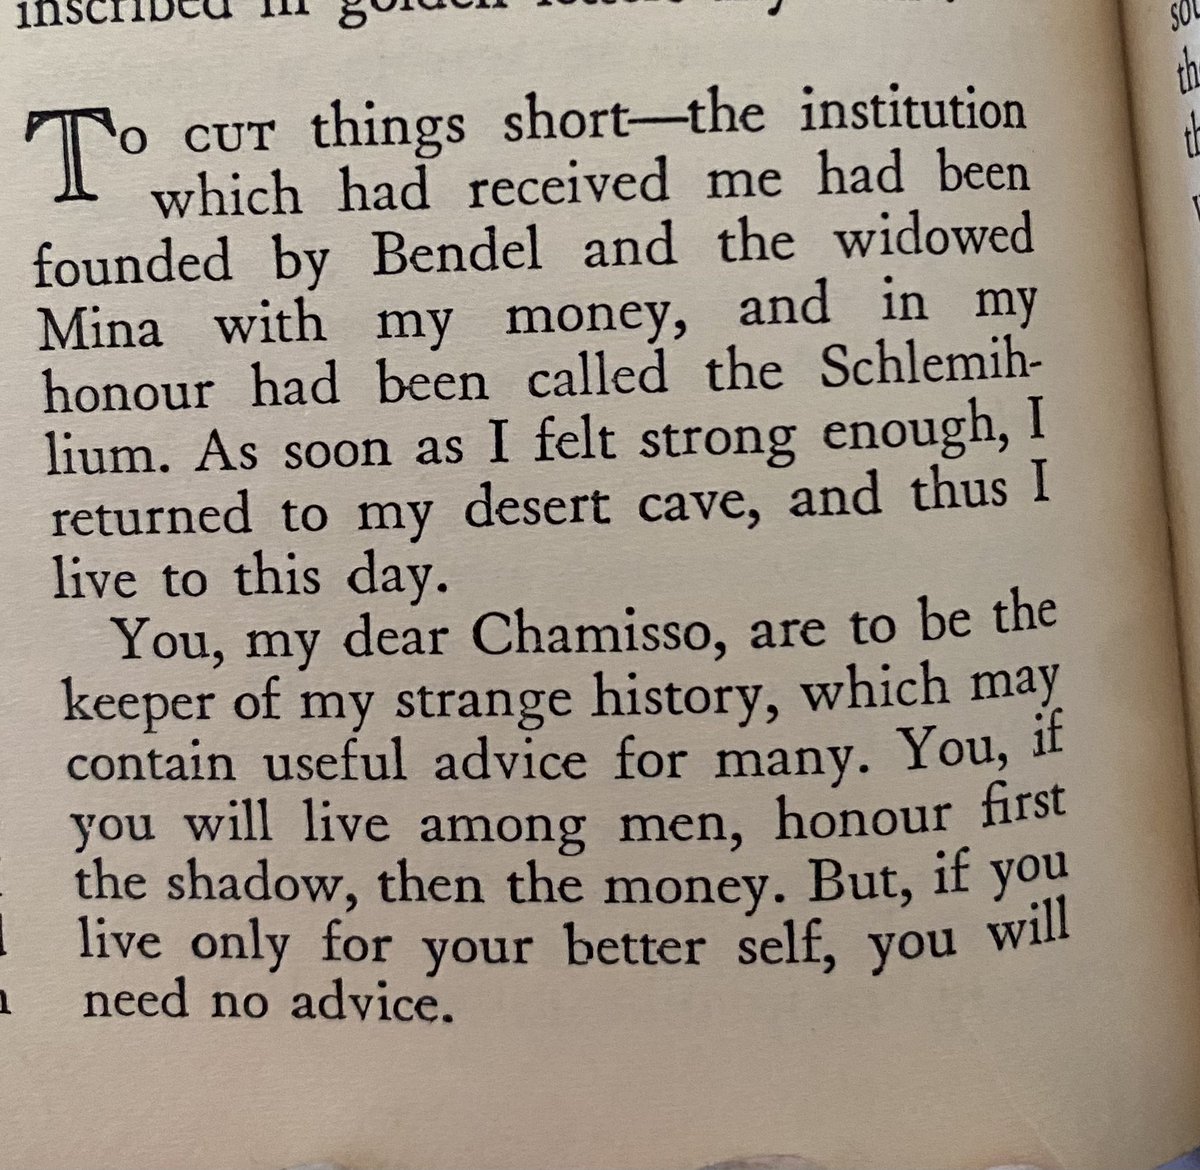 “…honour first the shadow, then the money. But, if you live only for your better self, you will need no advice.” 
#books #antiquebooks